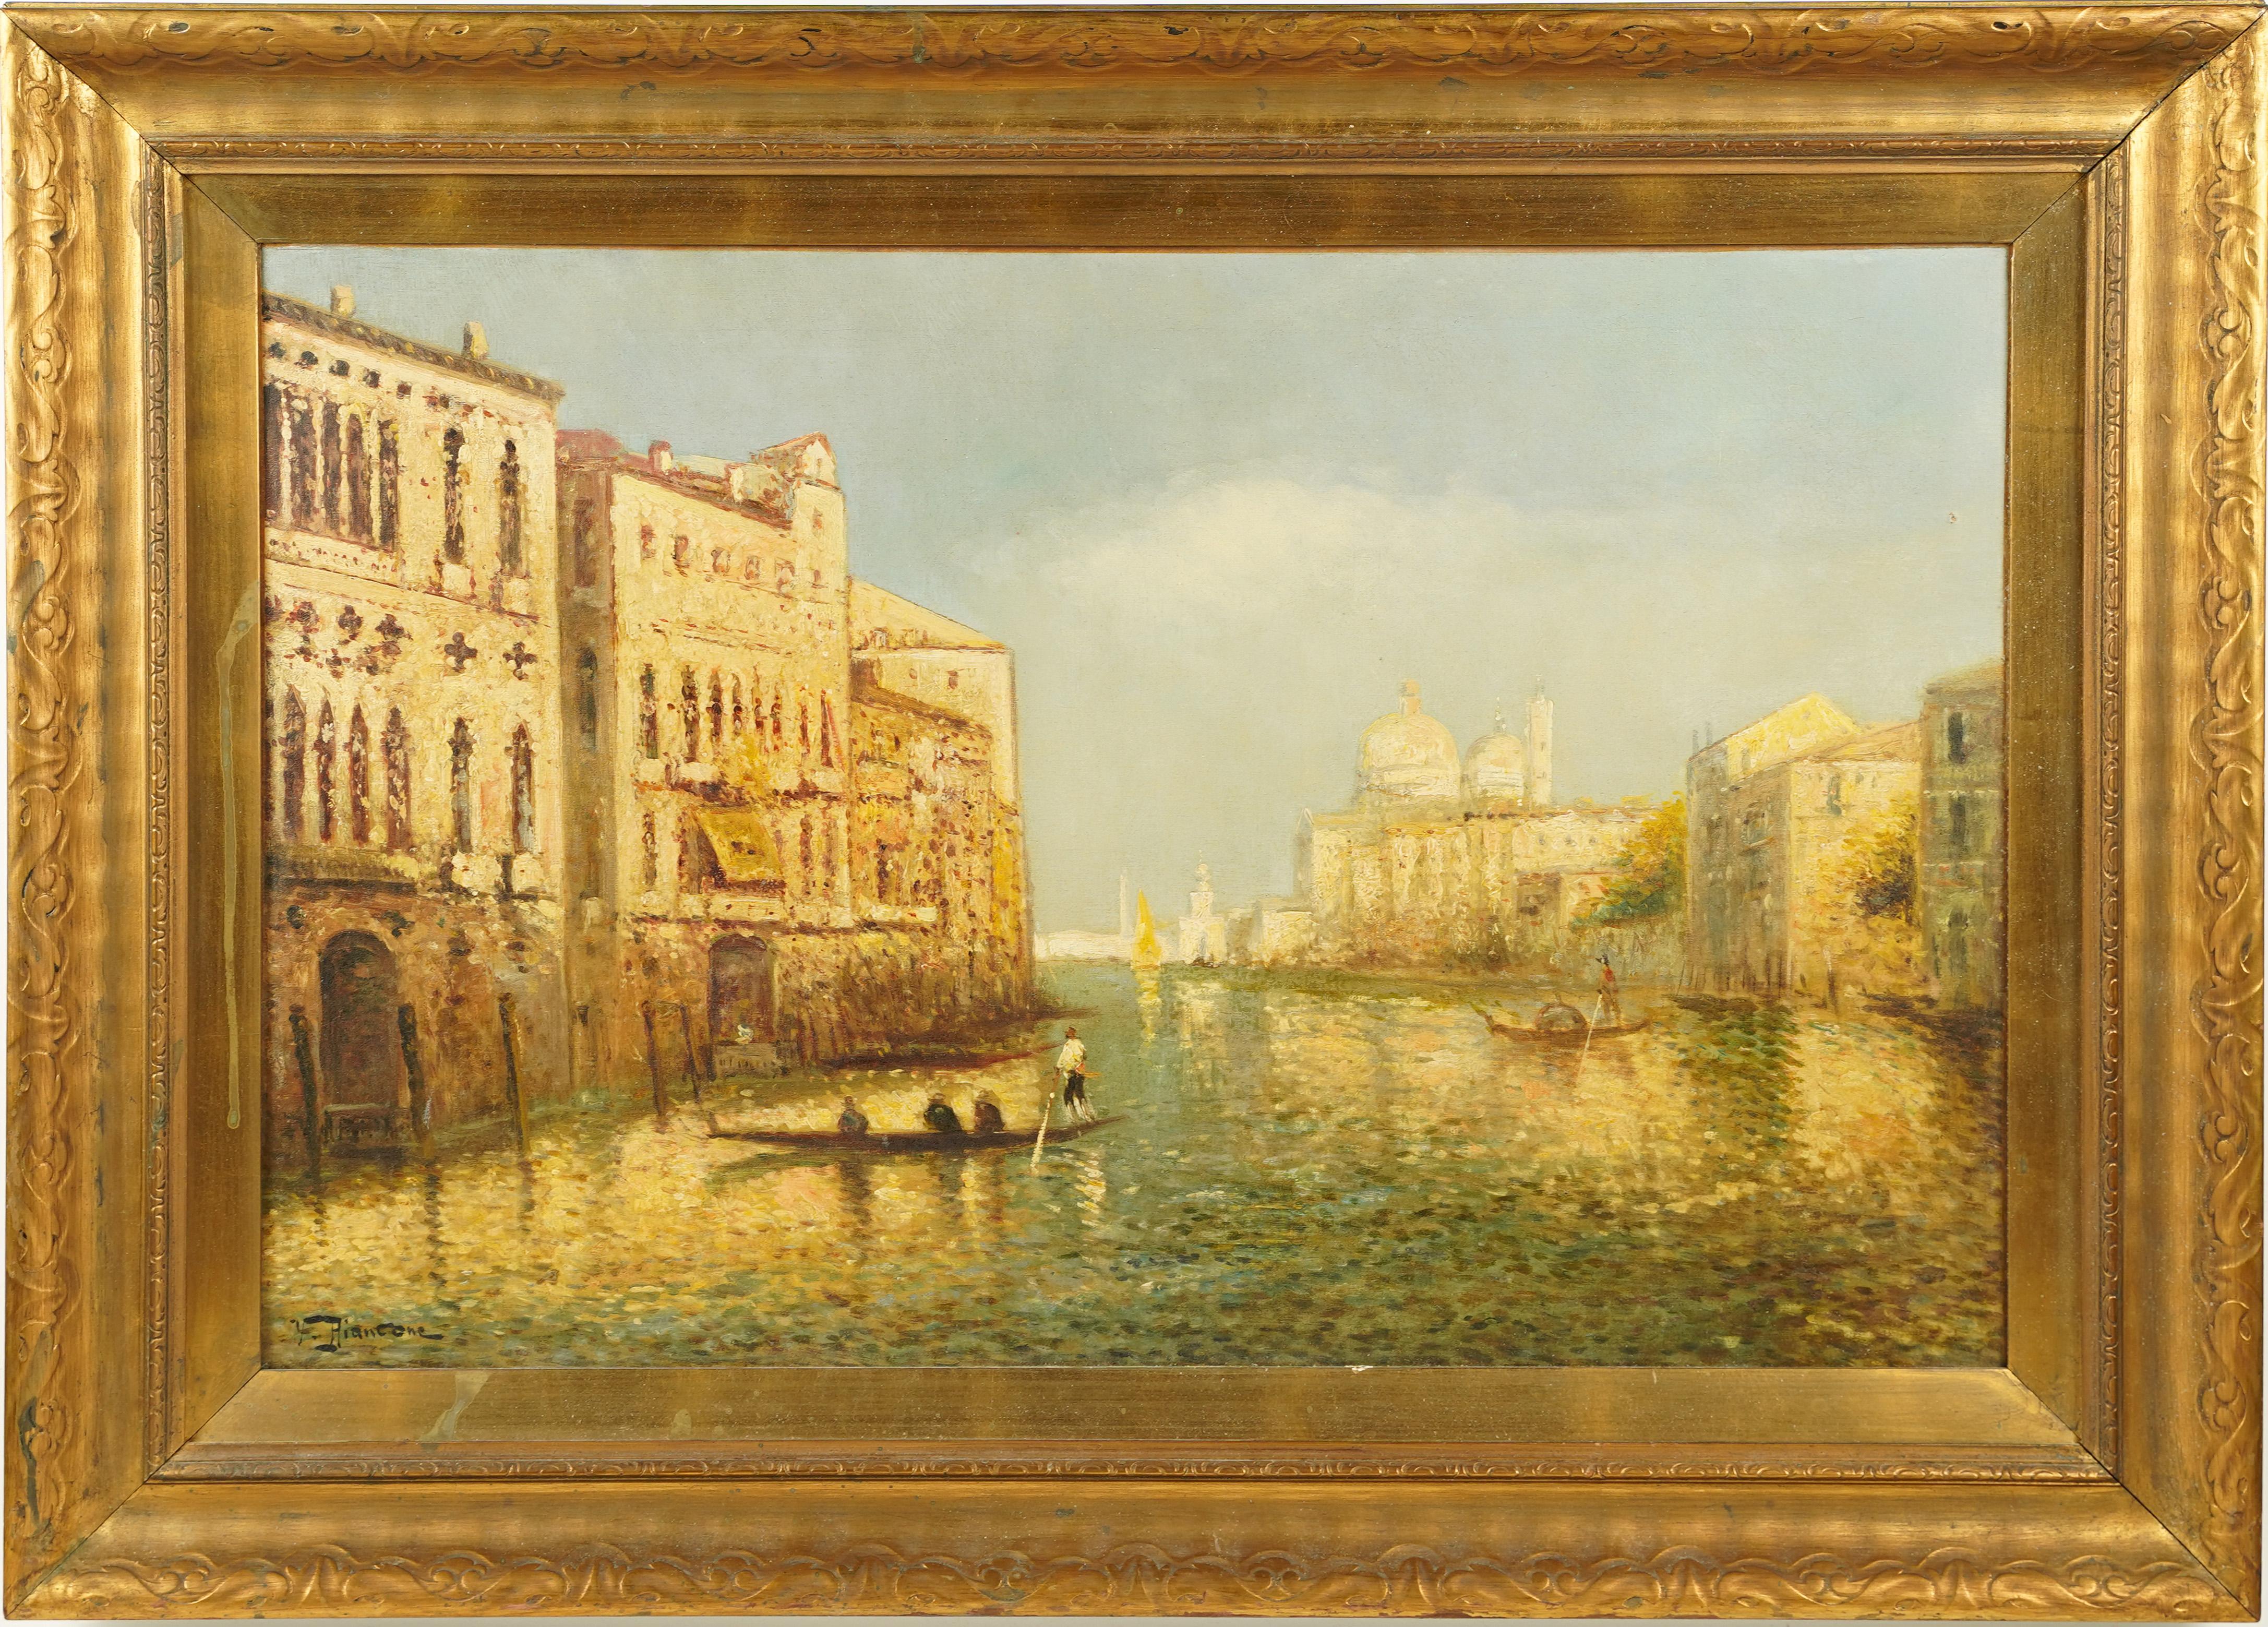 Unknown Landscape Painting - Signed Impressive 19th Century Venice Italy Original Framed Oil Painting